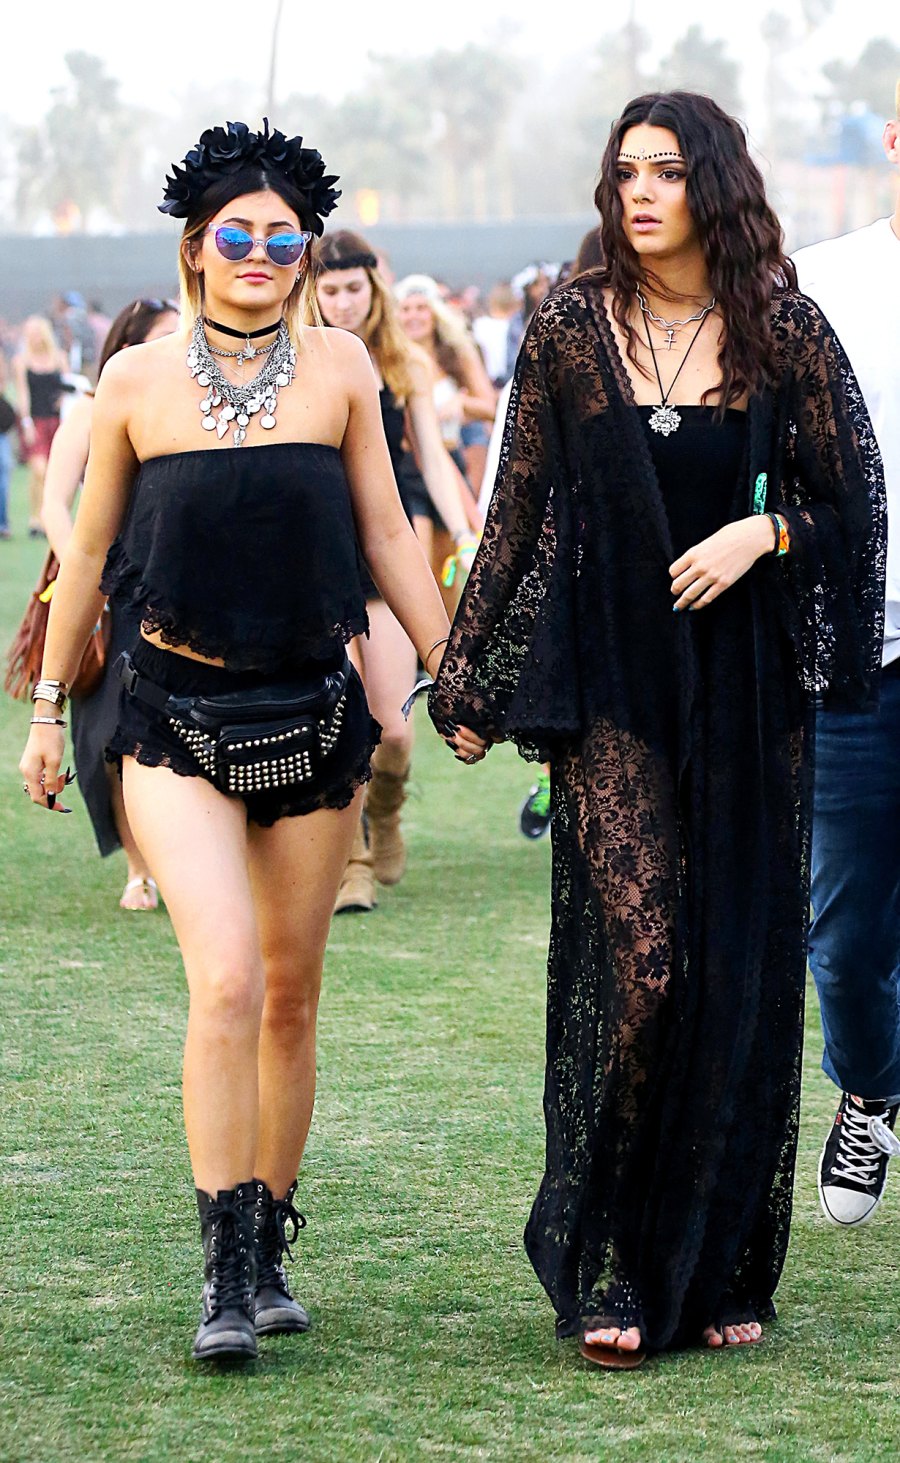 Kylie Jenner's Best Coachella Looks Over the Years: Flower Crowns, Colorful Wigs and More: Pics